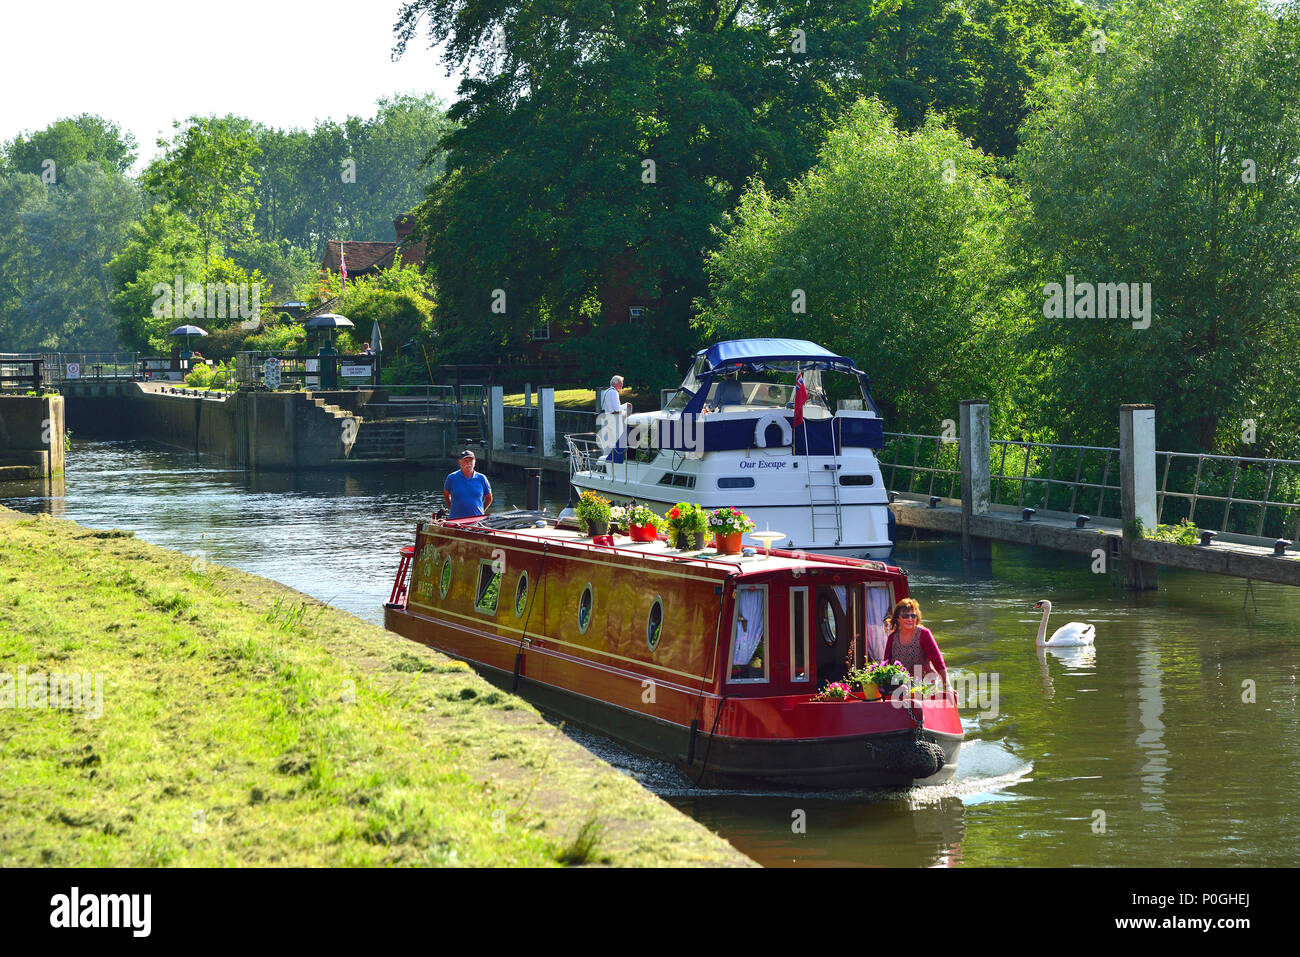 Motor boat and narrow boat at the beautiful  Sonning Lock on the River Thames, Sonning-on-Thames, Berkshire, UK, Great Britain Stock Photo